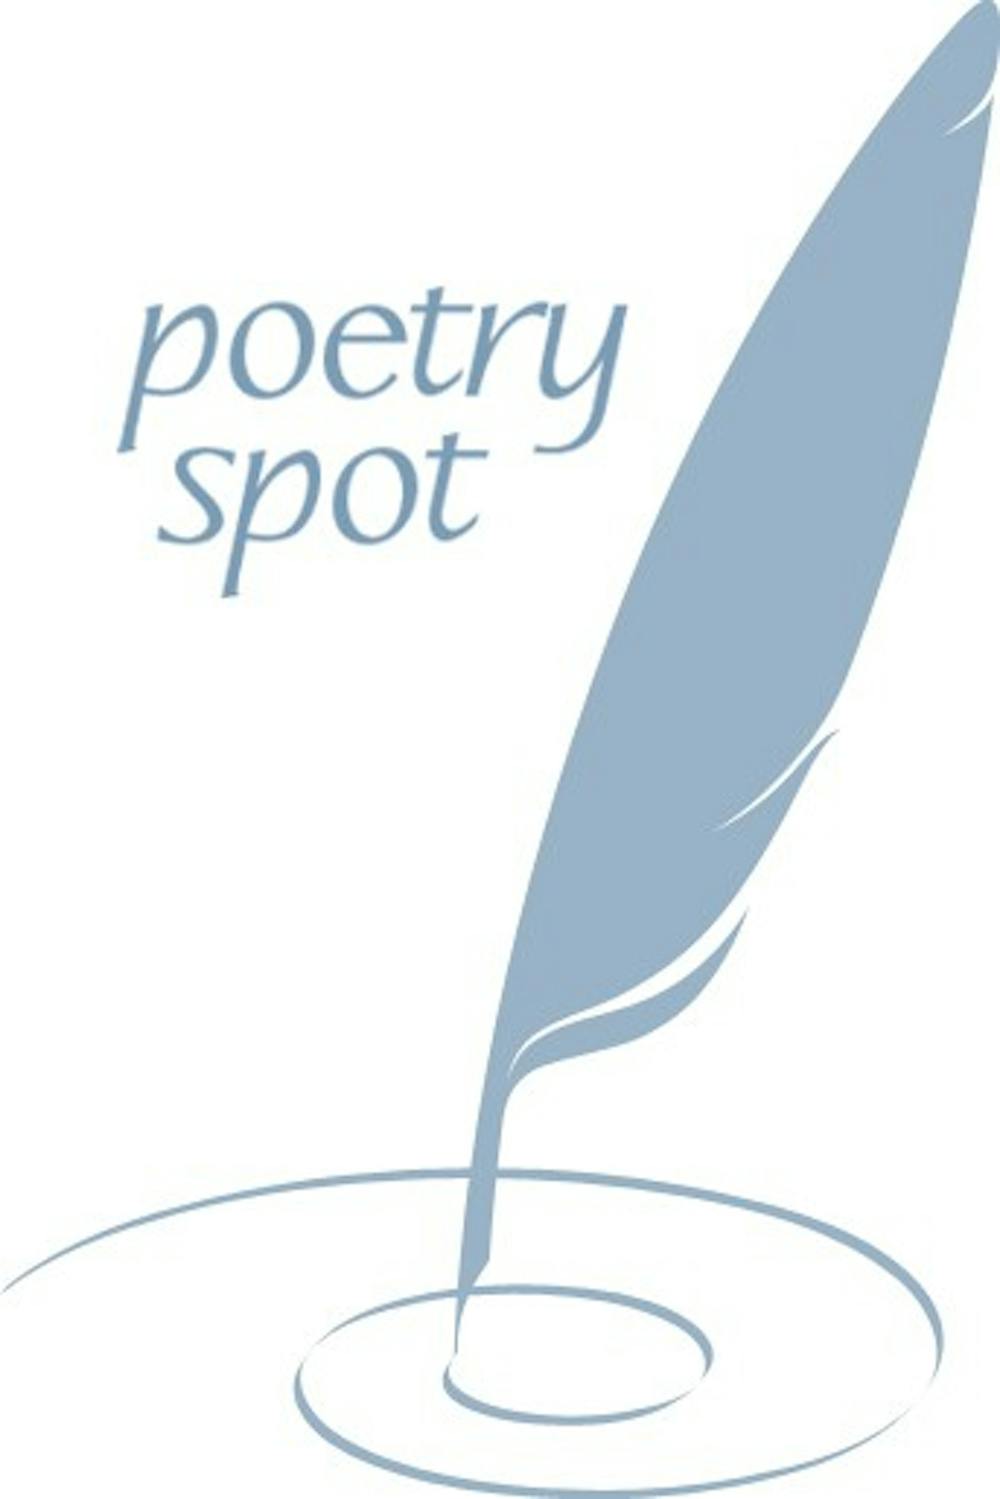 poetry_spot_revised